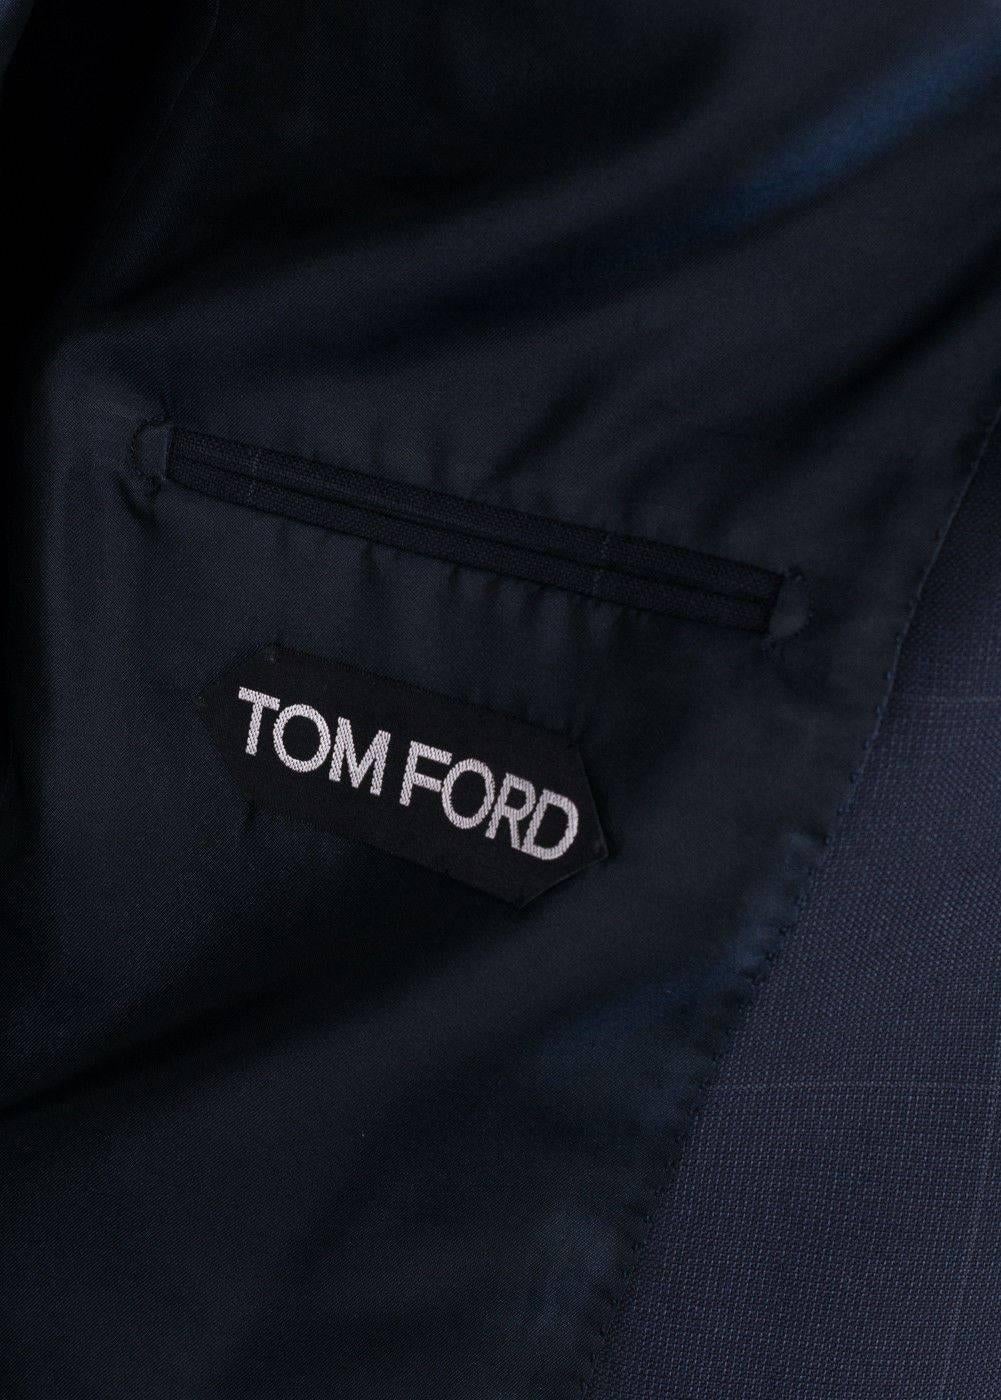 tom ford navy suit